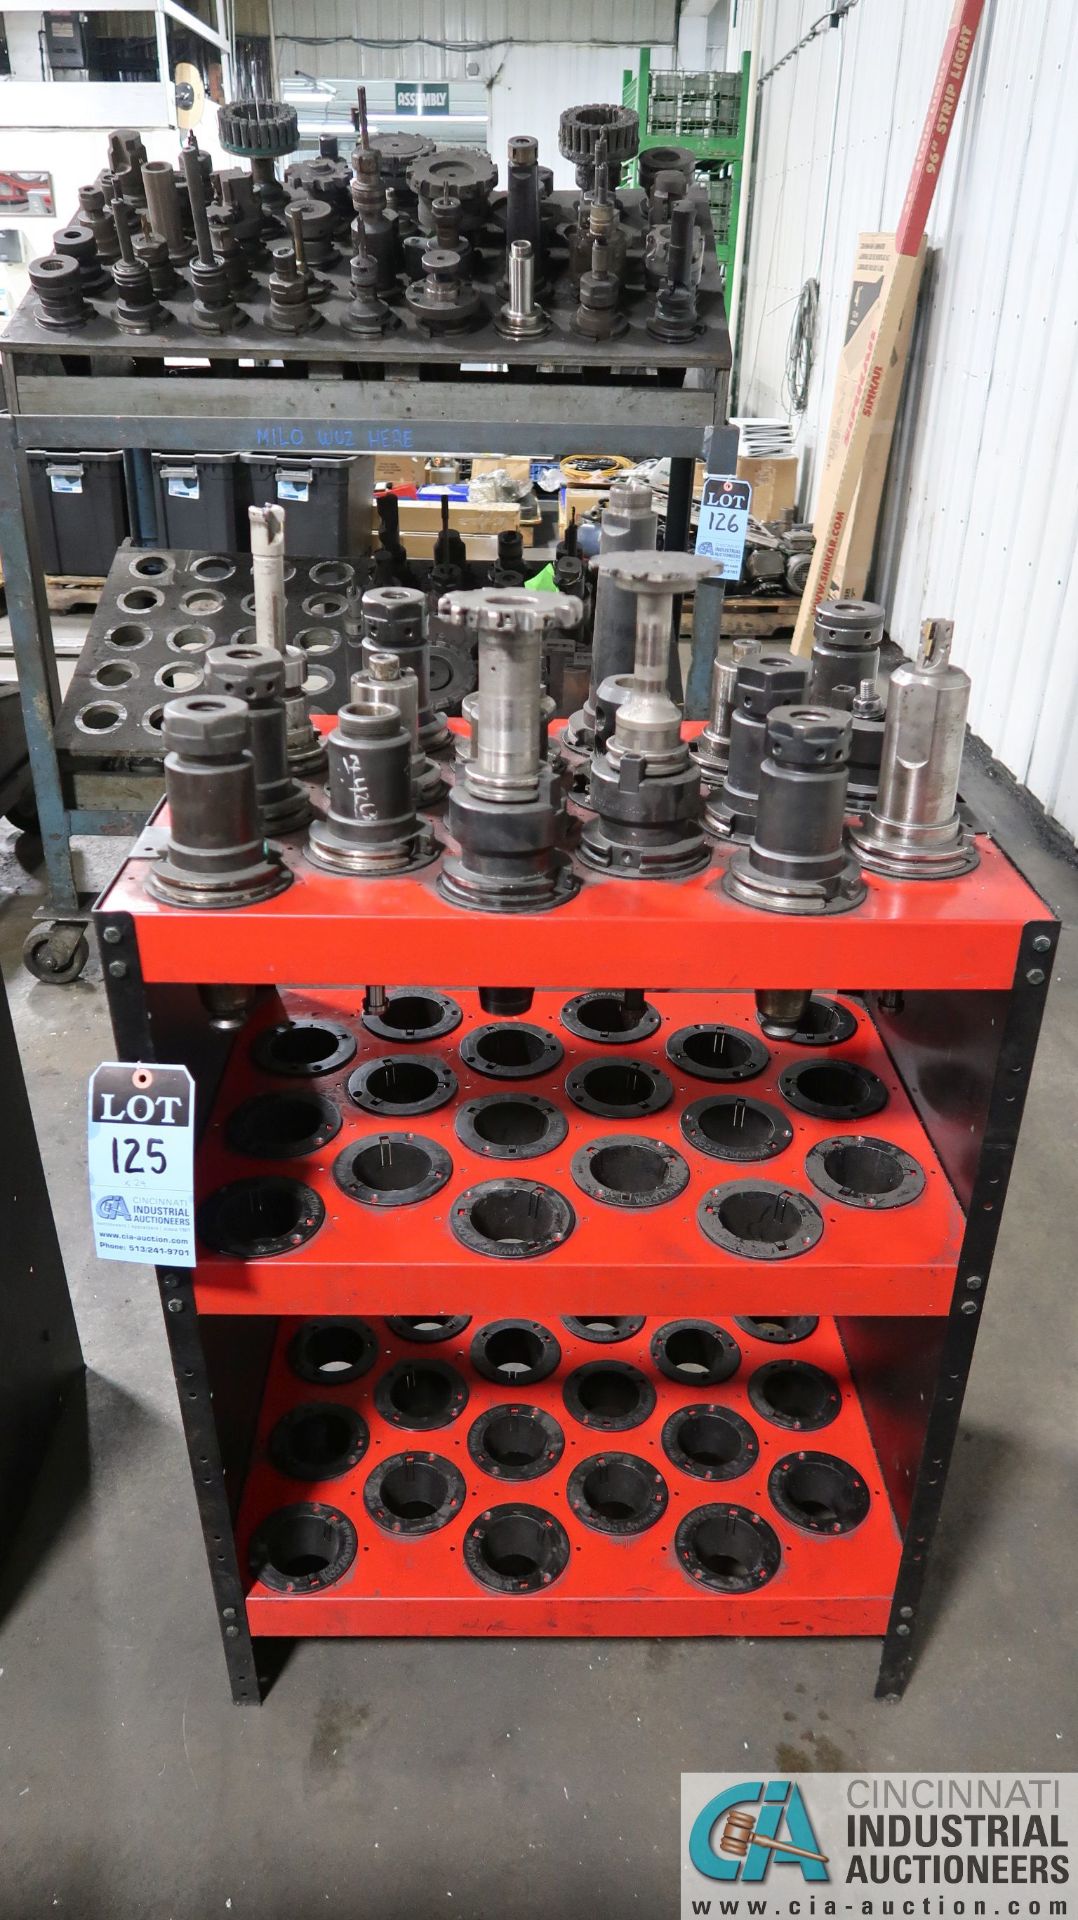 CAT 40 TAPER TOOLHOLDERS WITH HUOT STATIONARY TOOL TOWER